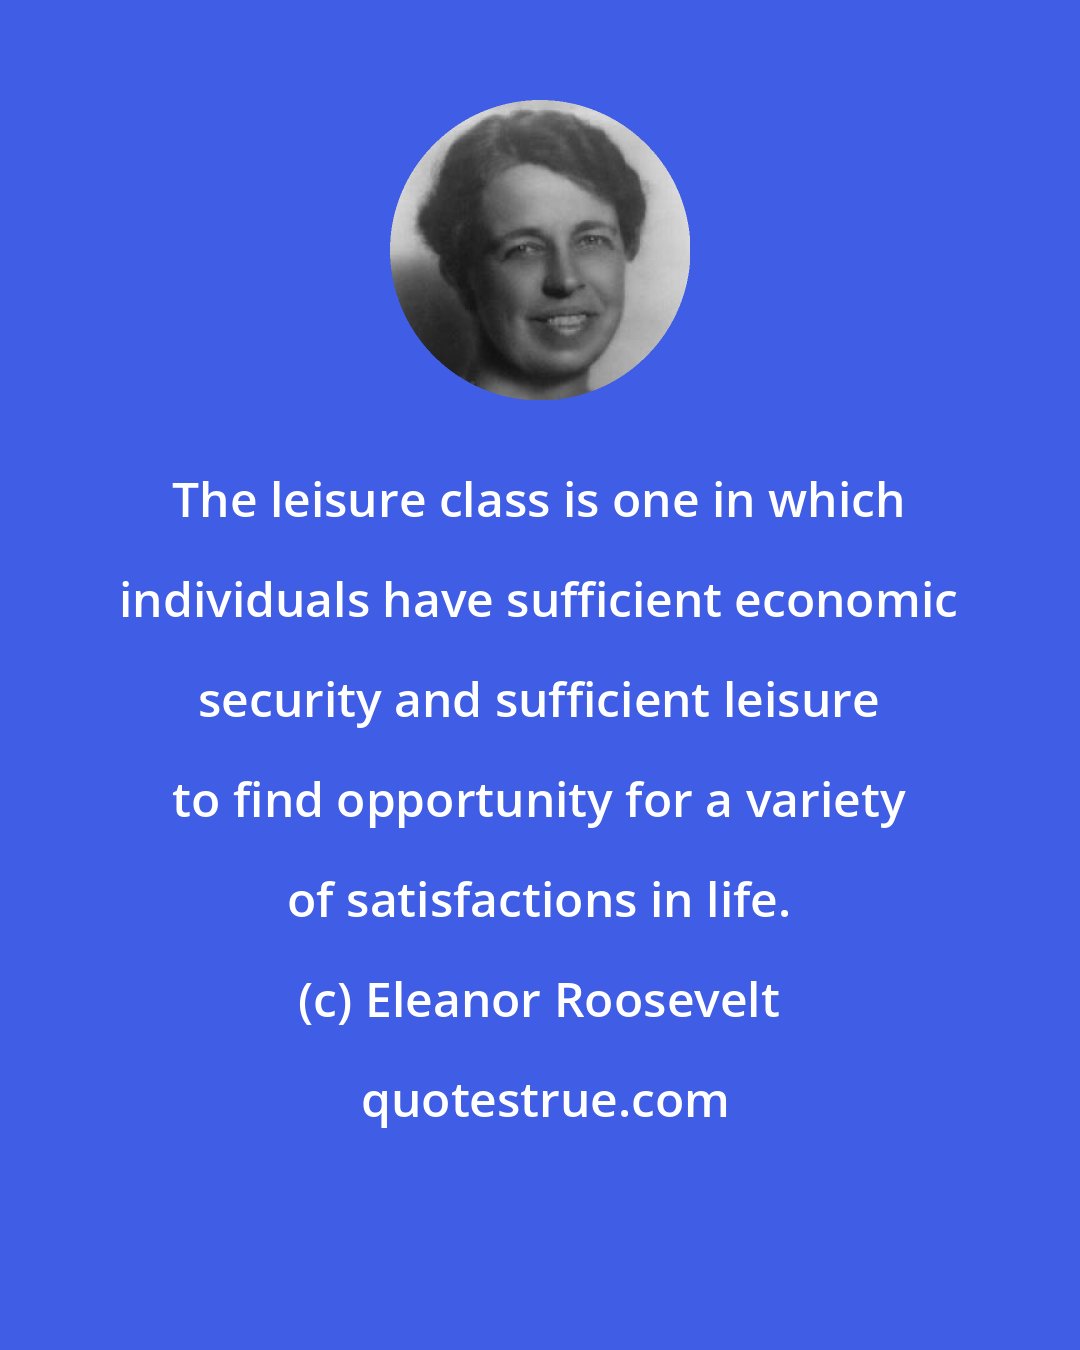 Eleanor Roosevelt: The leisure class is one in which individuals have sufficient economic security and sufficient leisure to find opportunity for a variety of satisfactions in life.